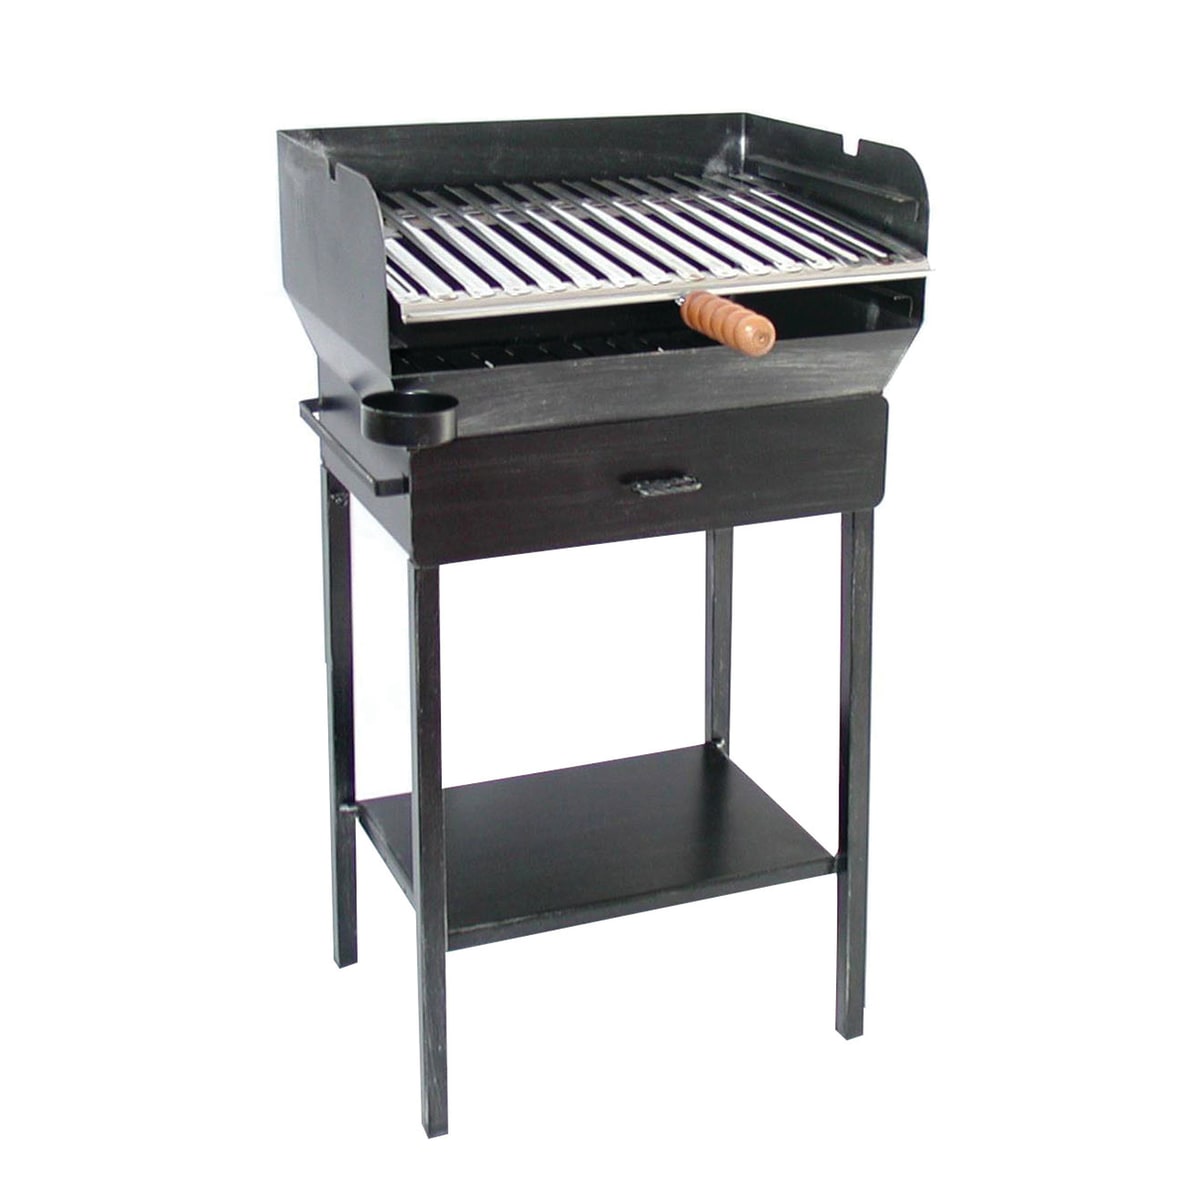 FAMILY CRUCCOLINI CHARCOAL AND WOOD BARBECUE